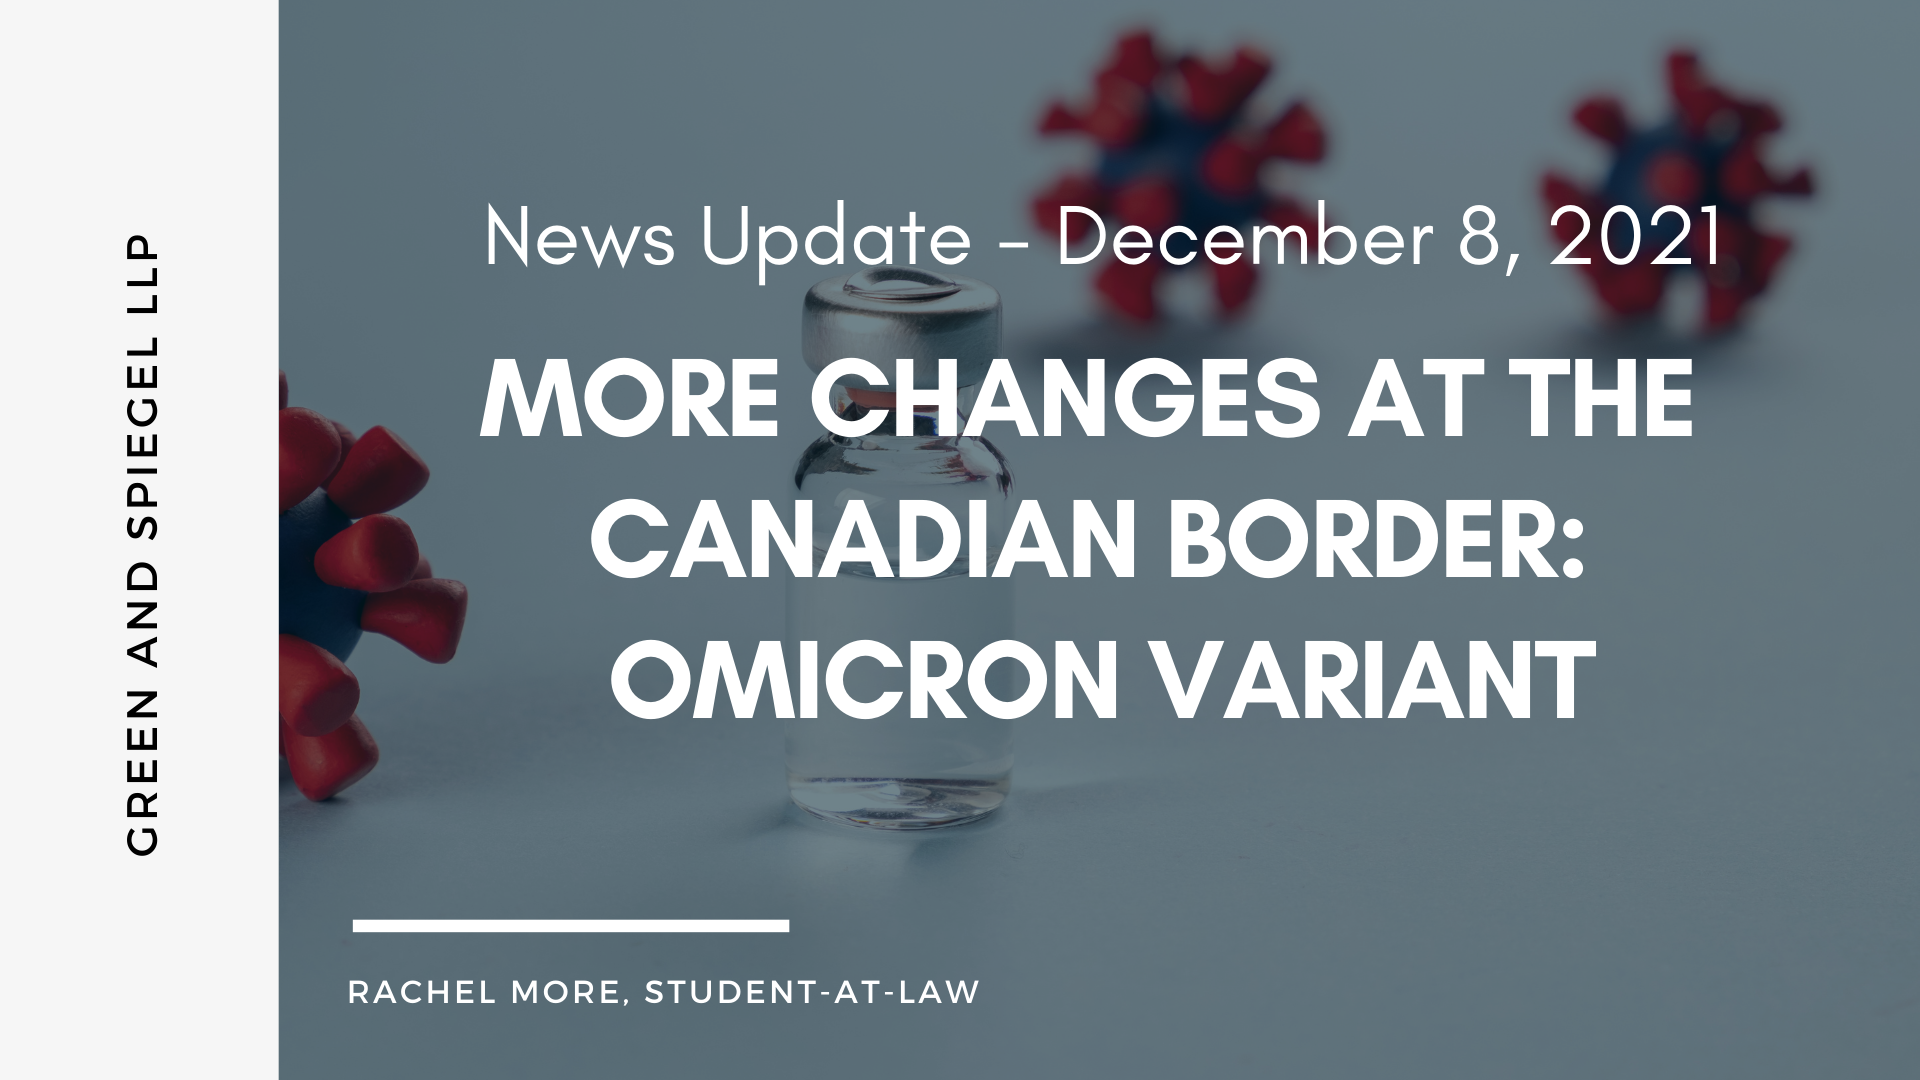 MORE CHANGES AT THE CANADIAN BORDER: OMICRON VARIANT